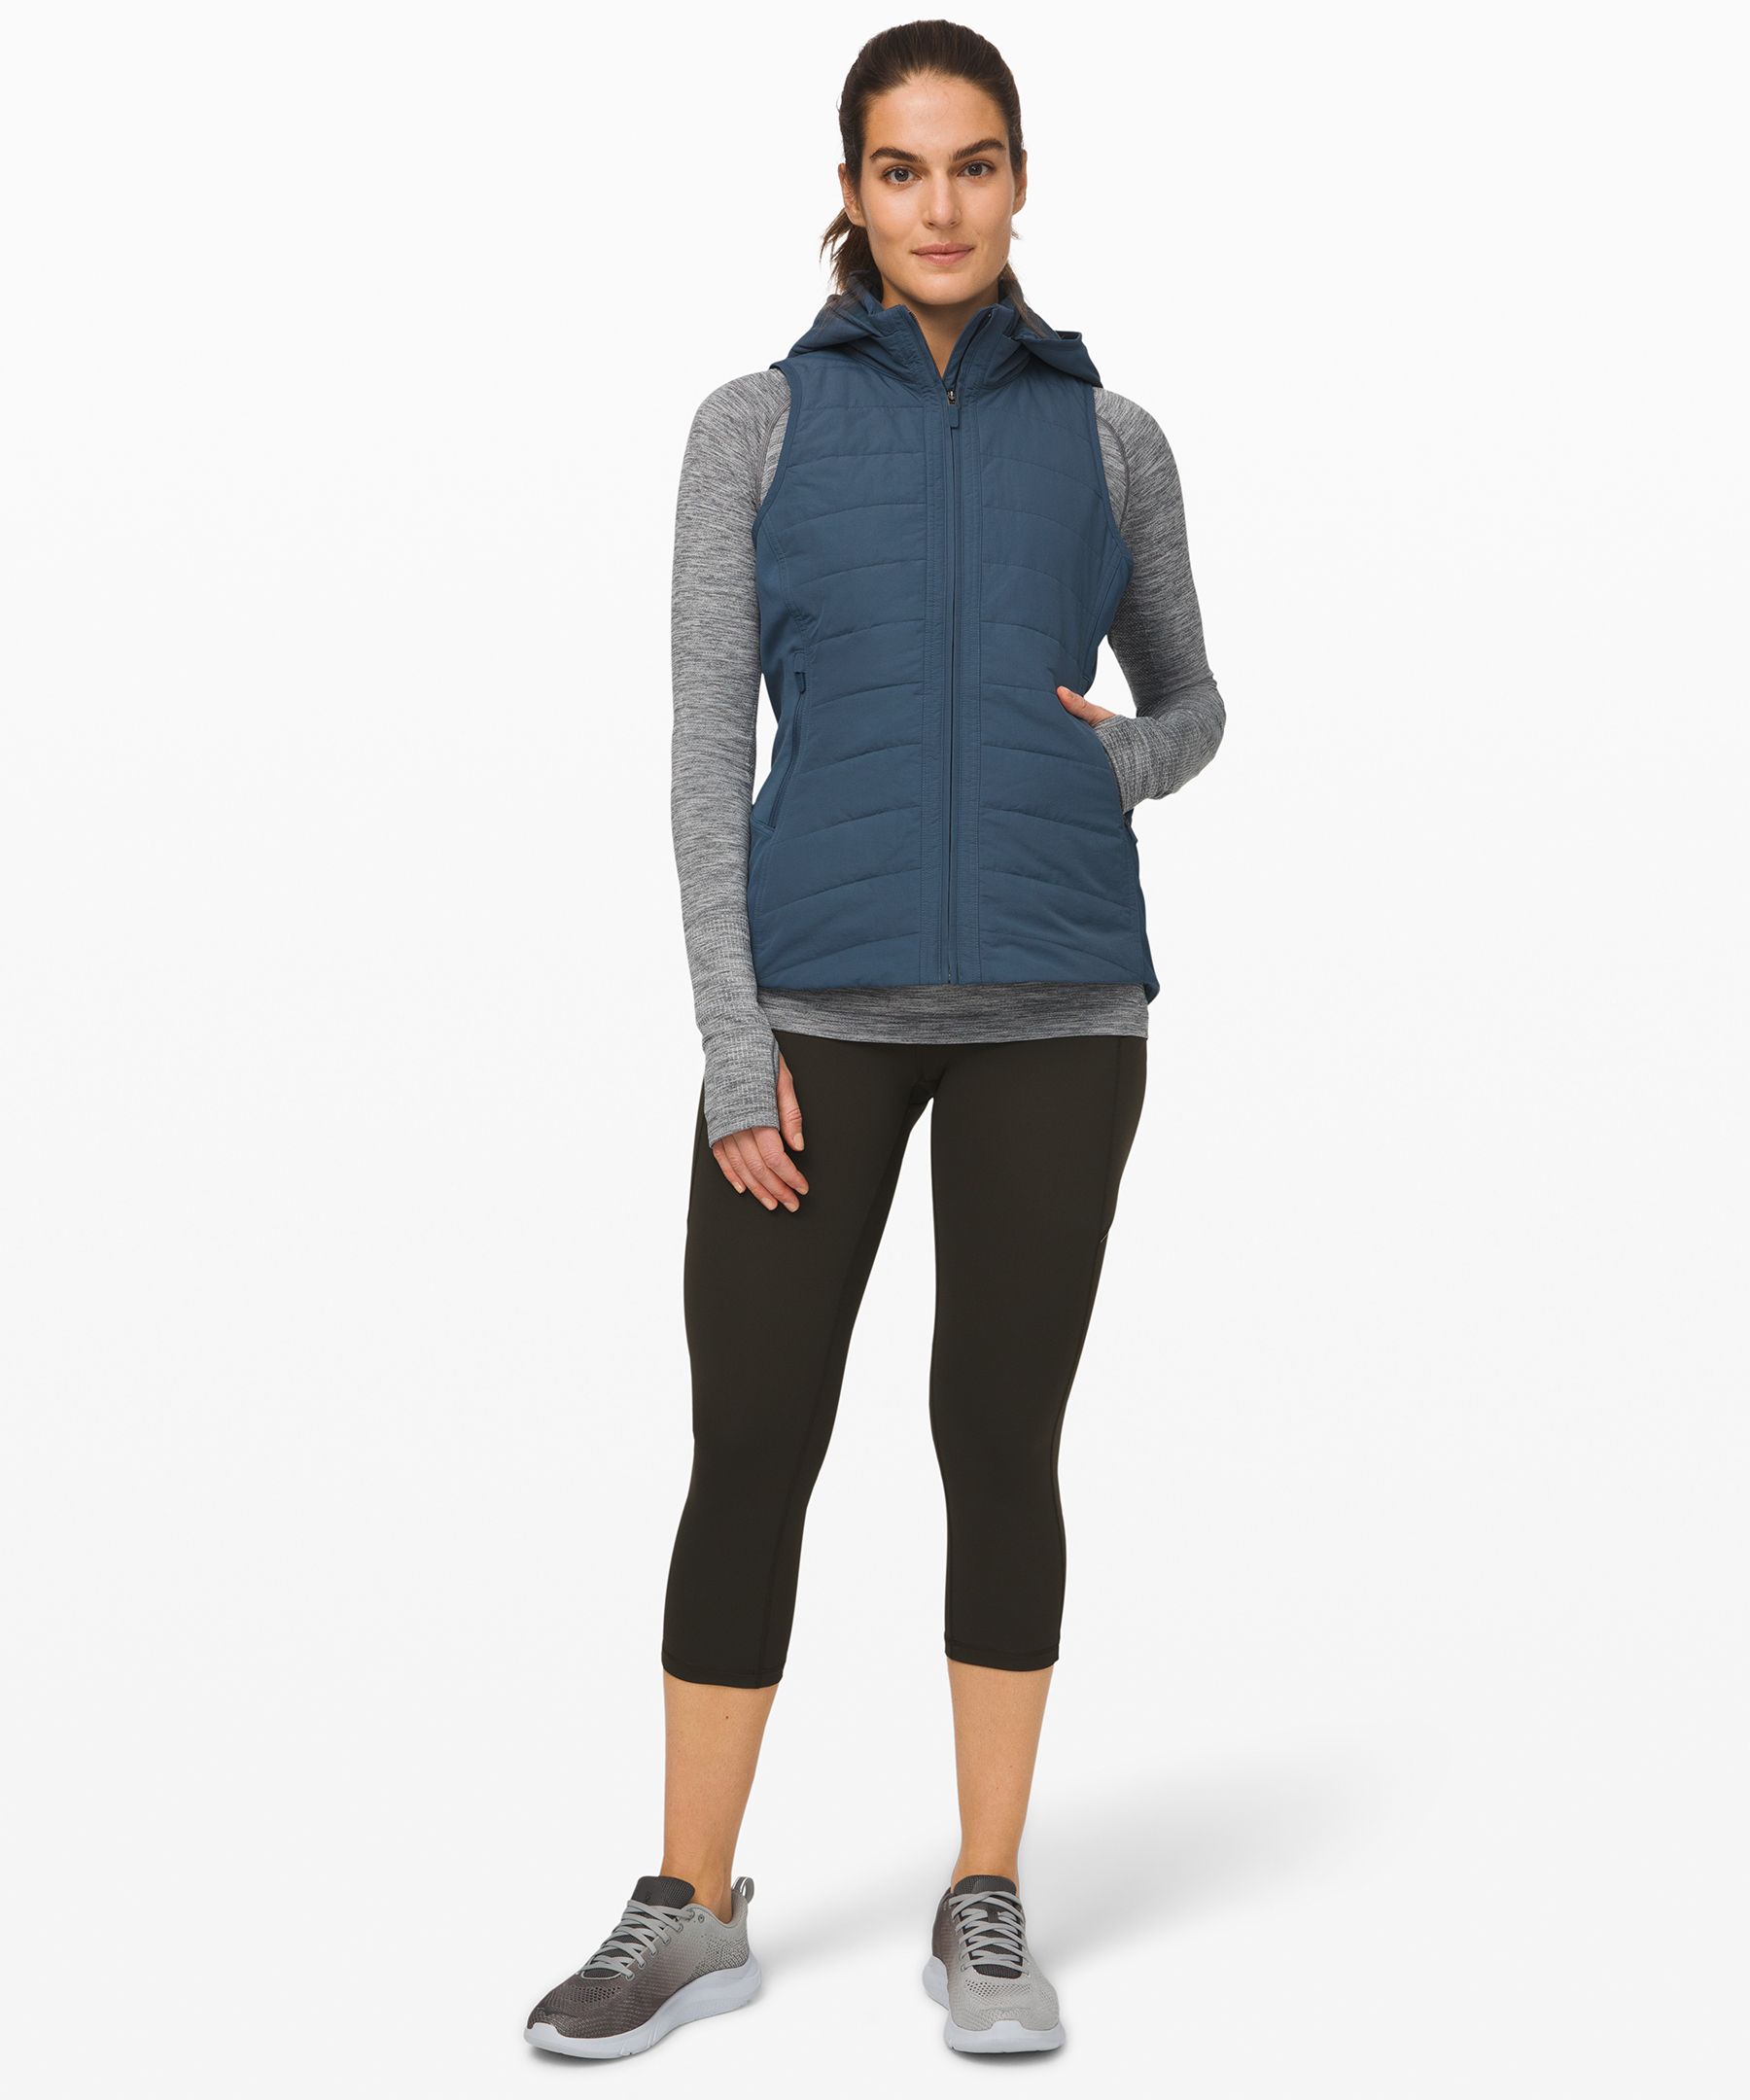 Lululemon Another Mile Vest Review